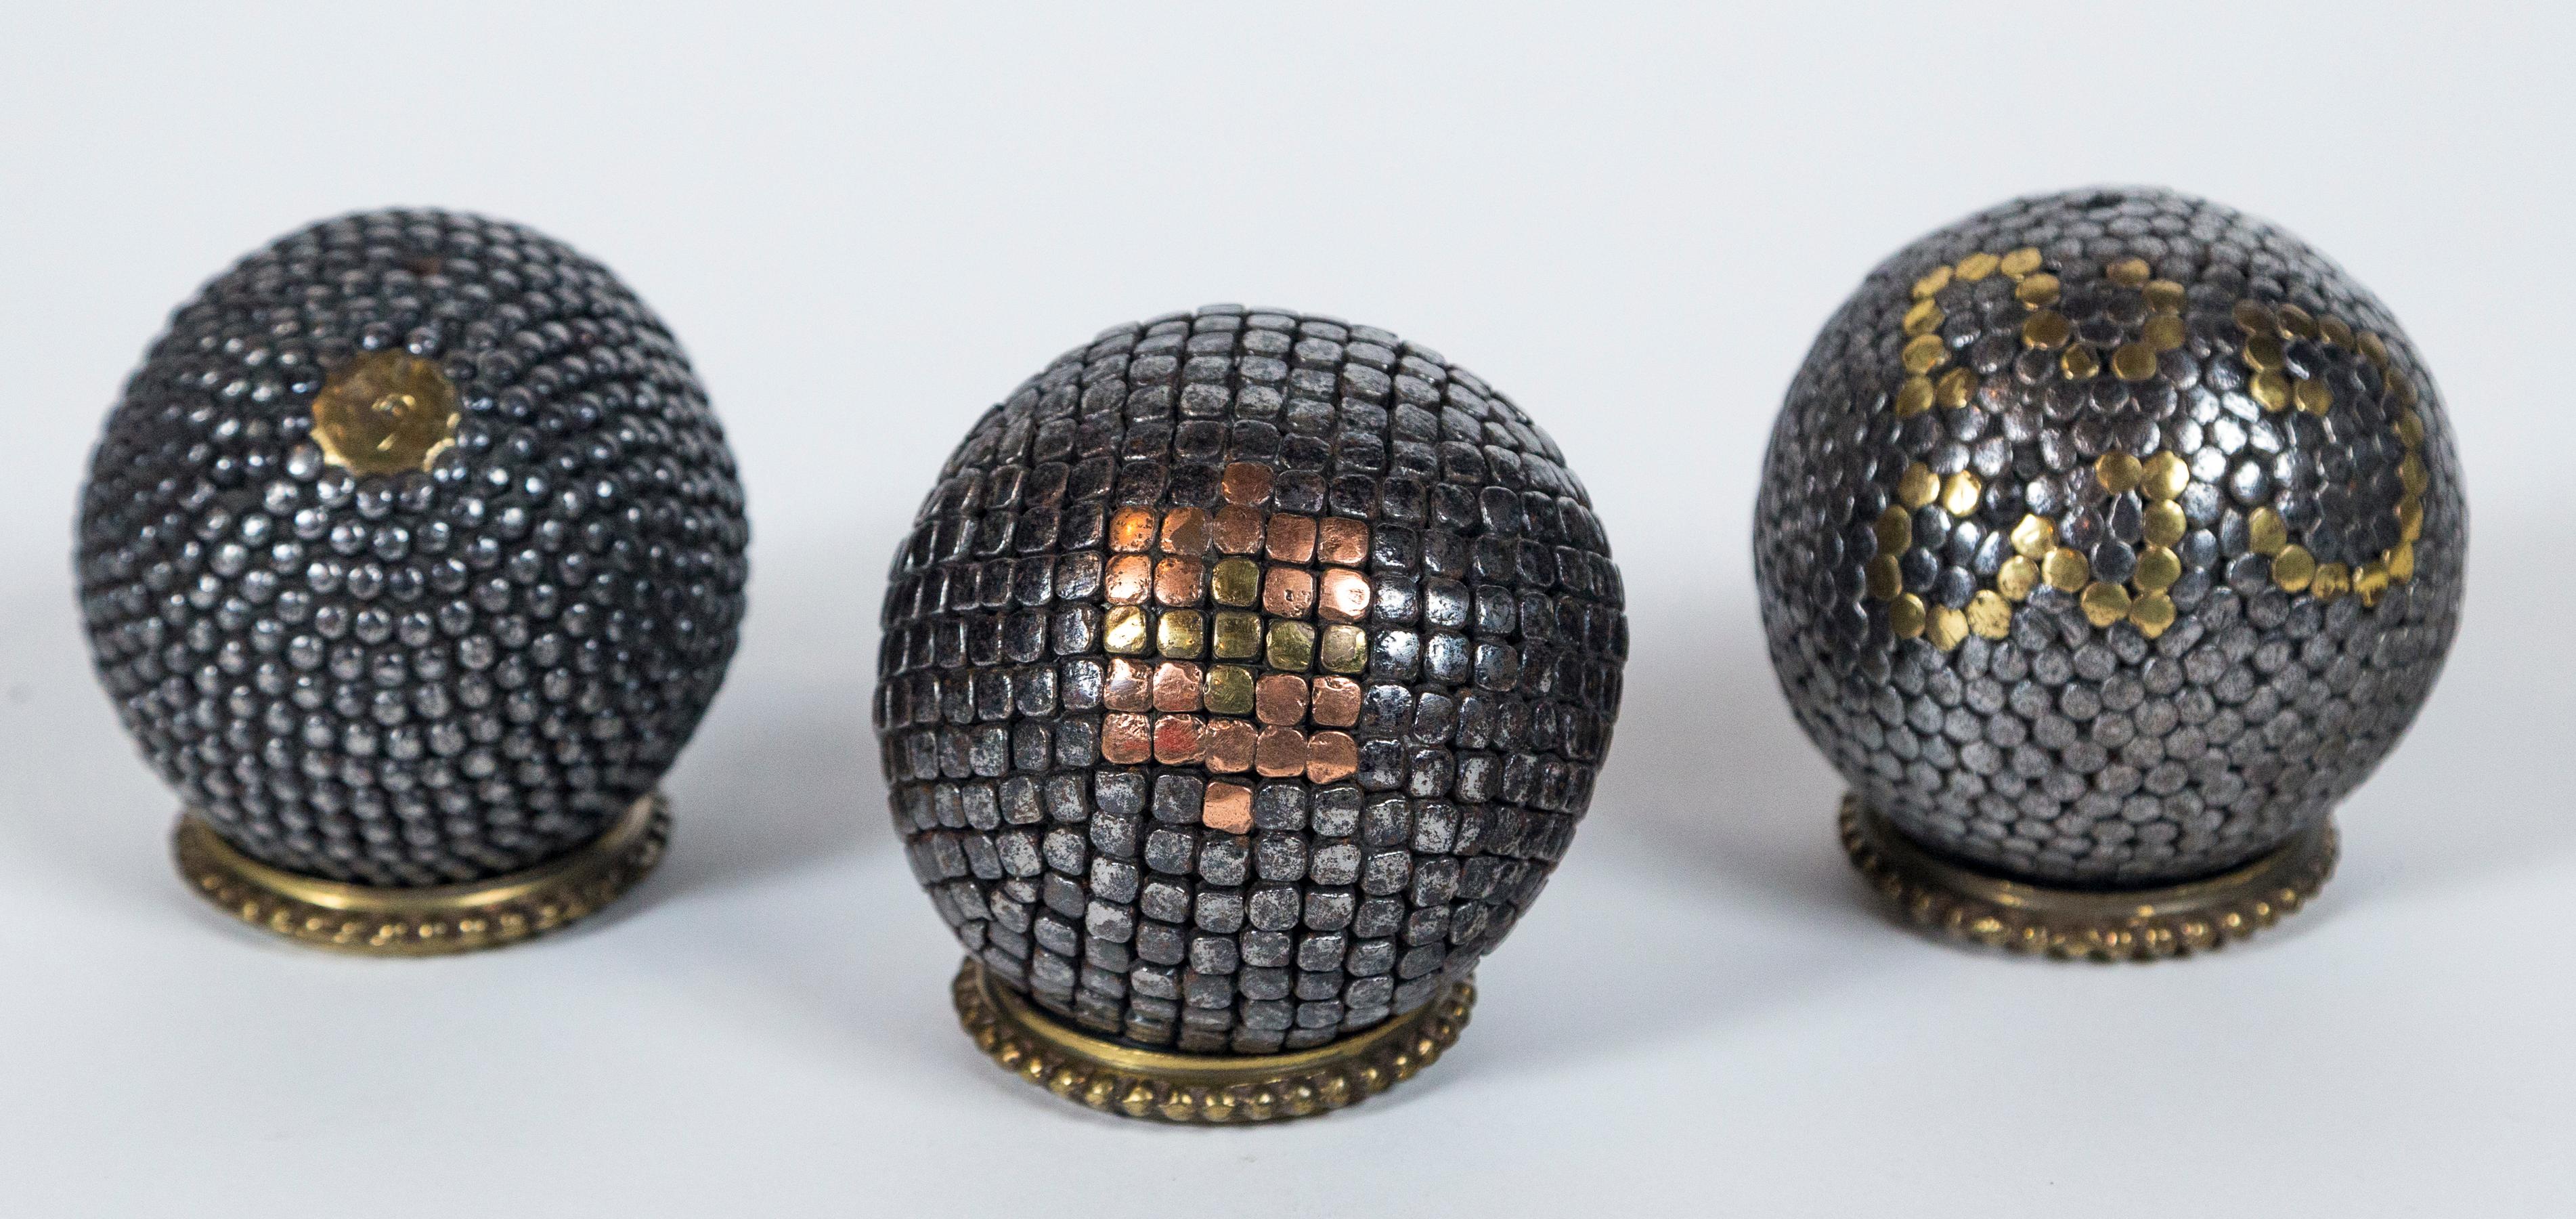 Three Antique Pétanque Balls, France, late 19th Century. Solid wood center, covered in hammered, steel nails with accent brass and copper nails. Brass rings as shown are for display. Petanque is the French version of Italian Bocce.